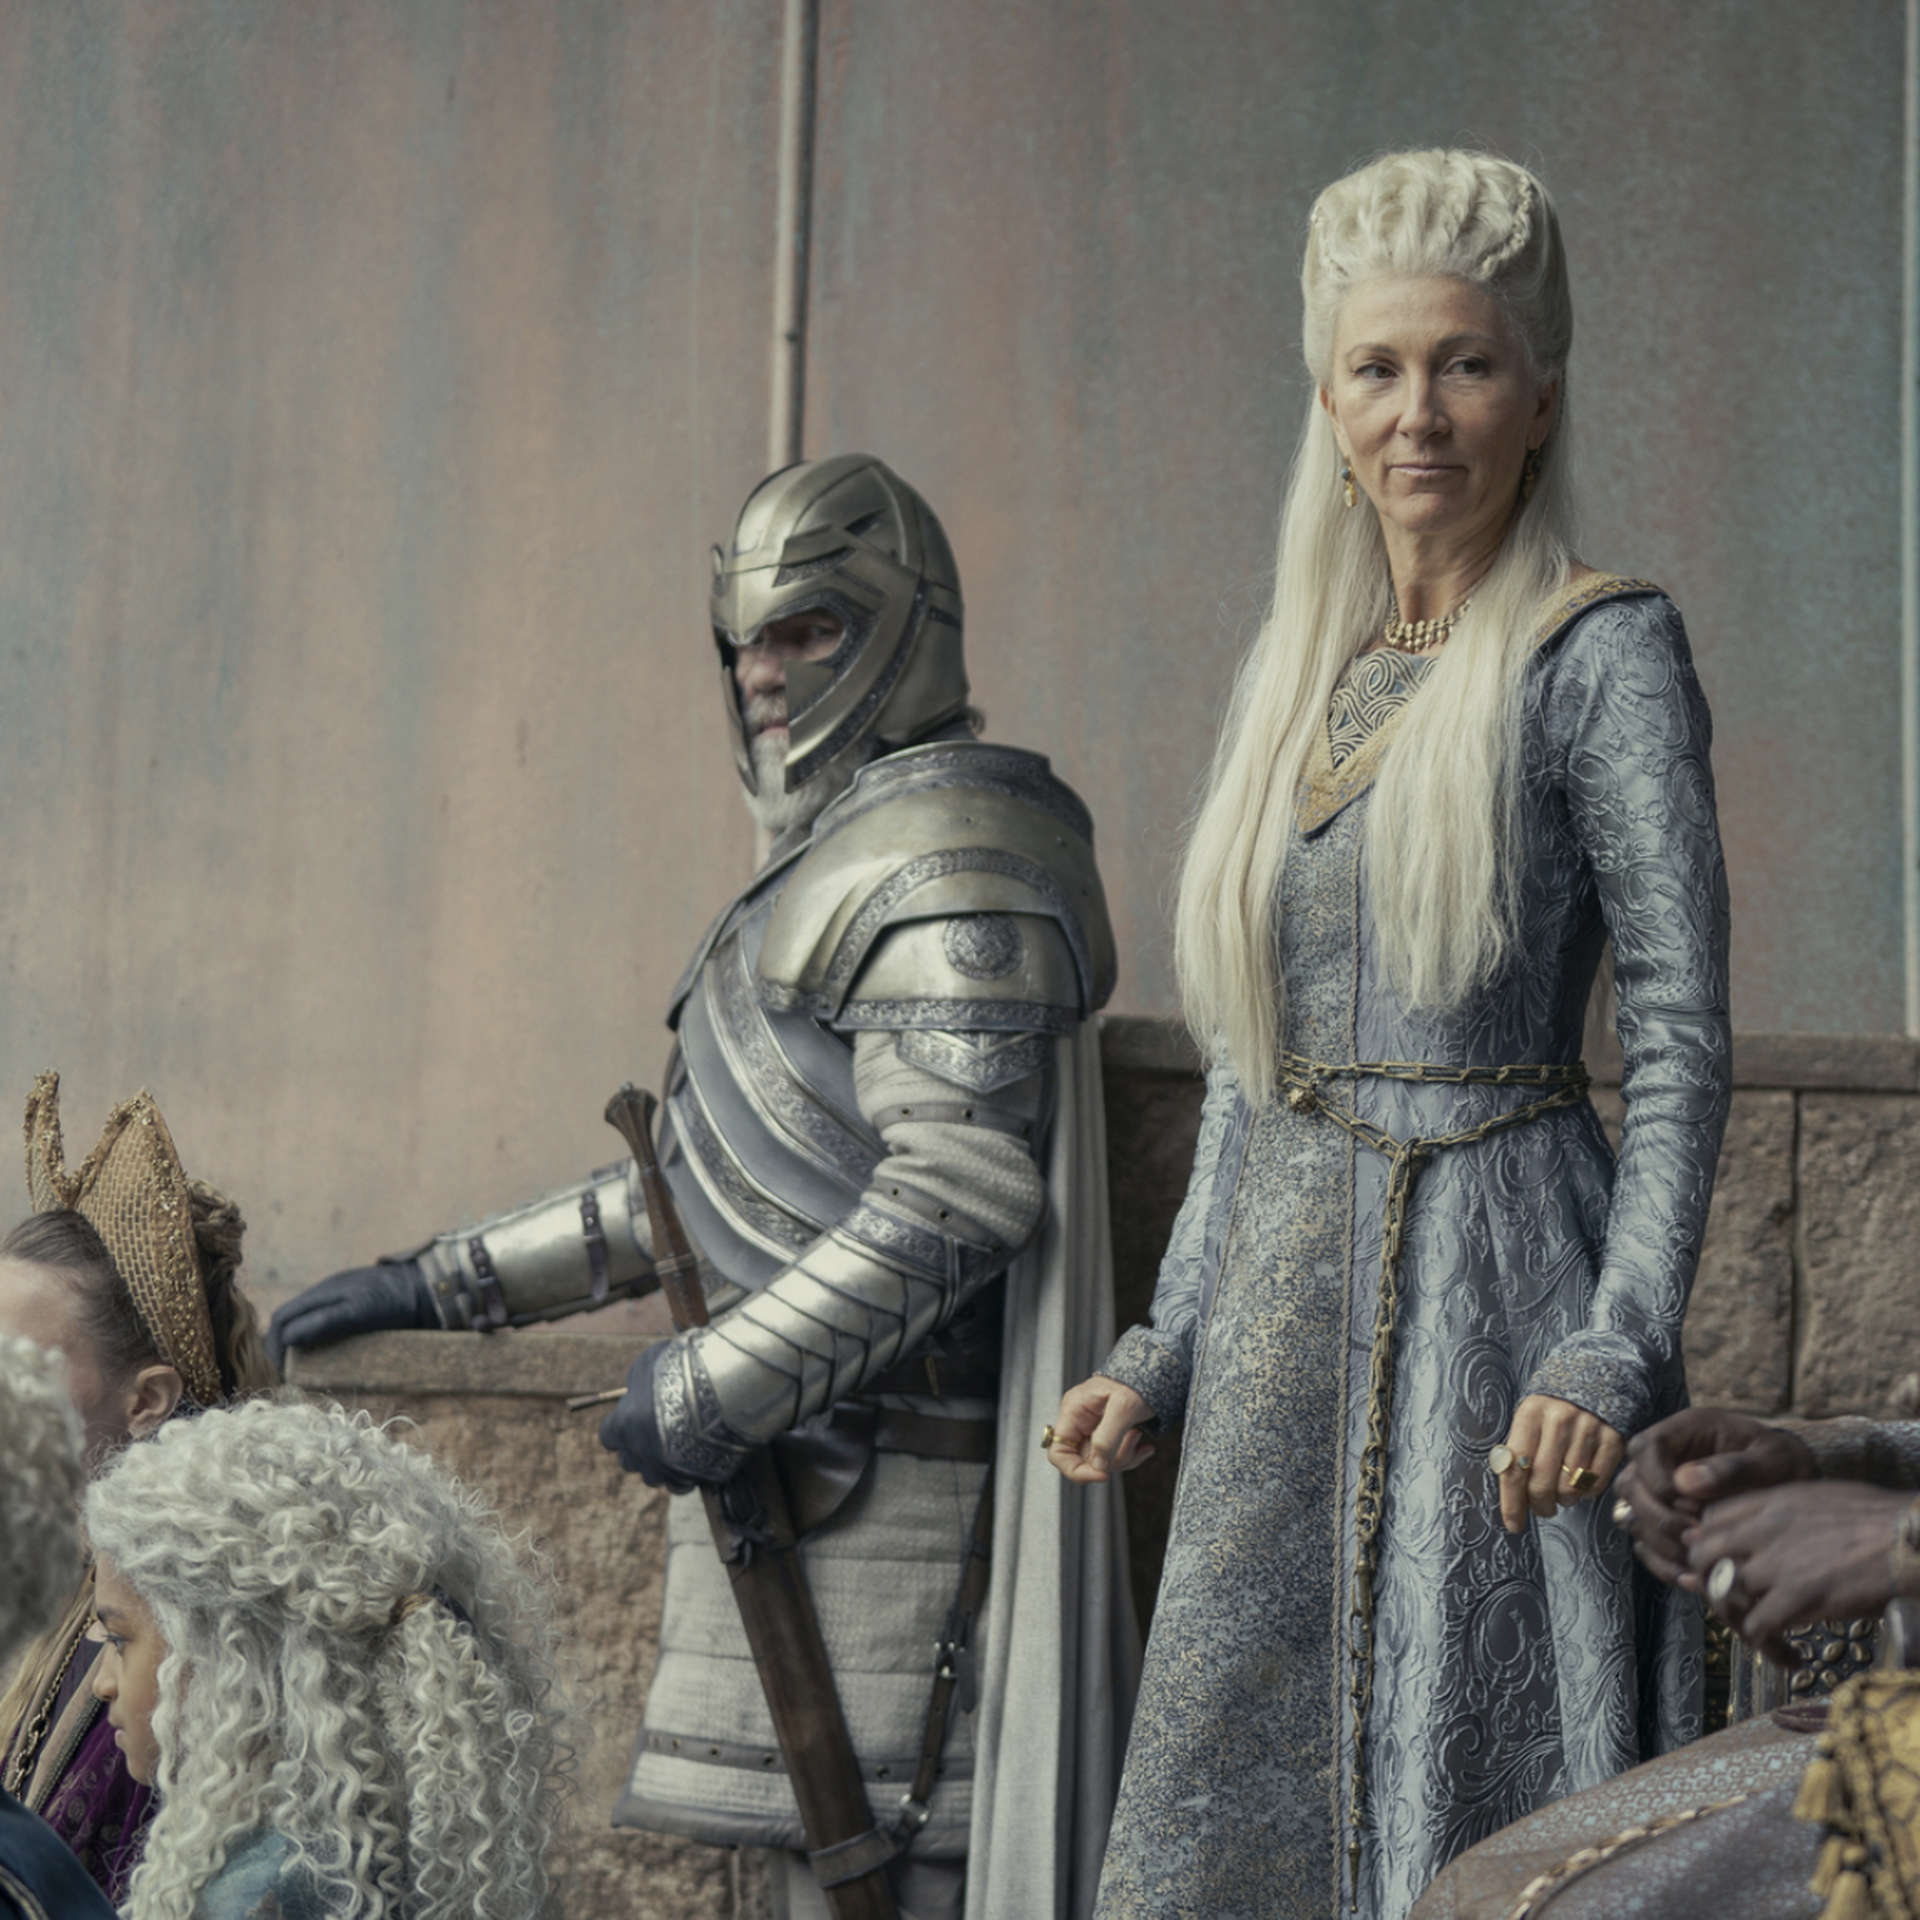 House of the Dragon renewed for season 2 after record-breaking premiere